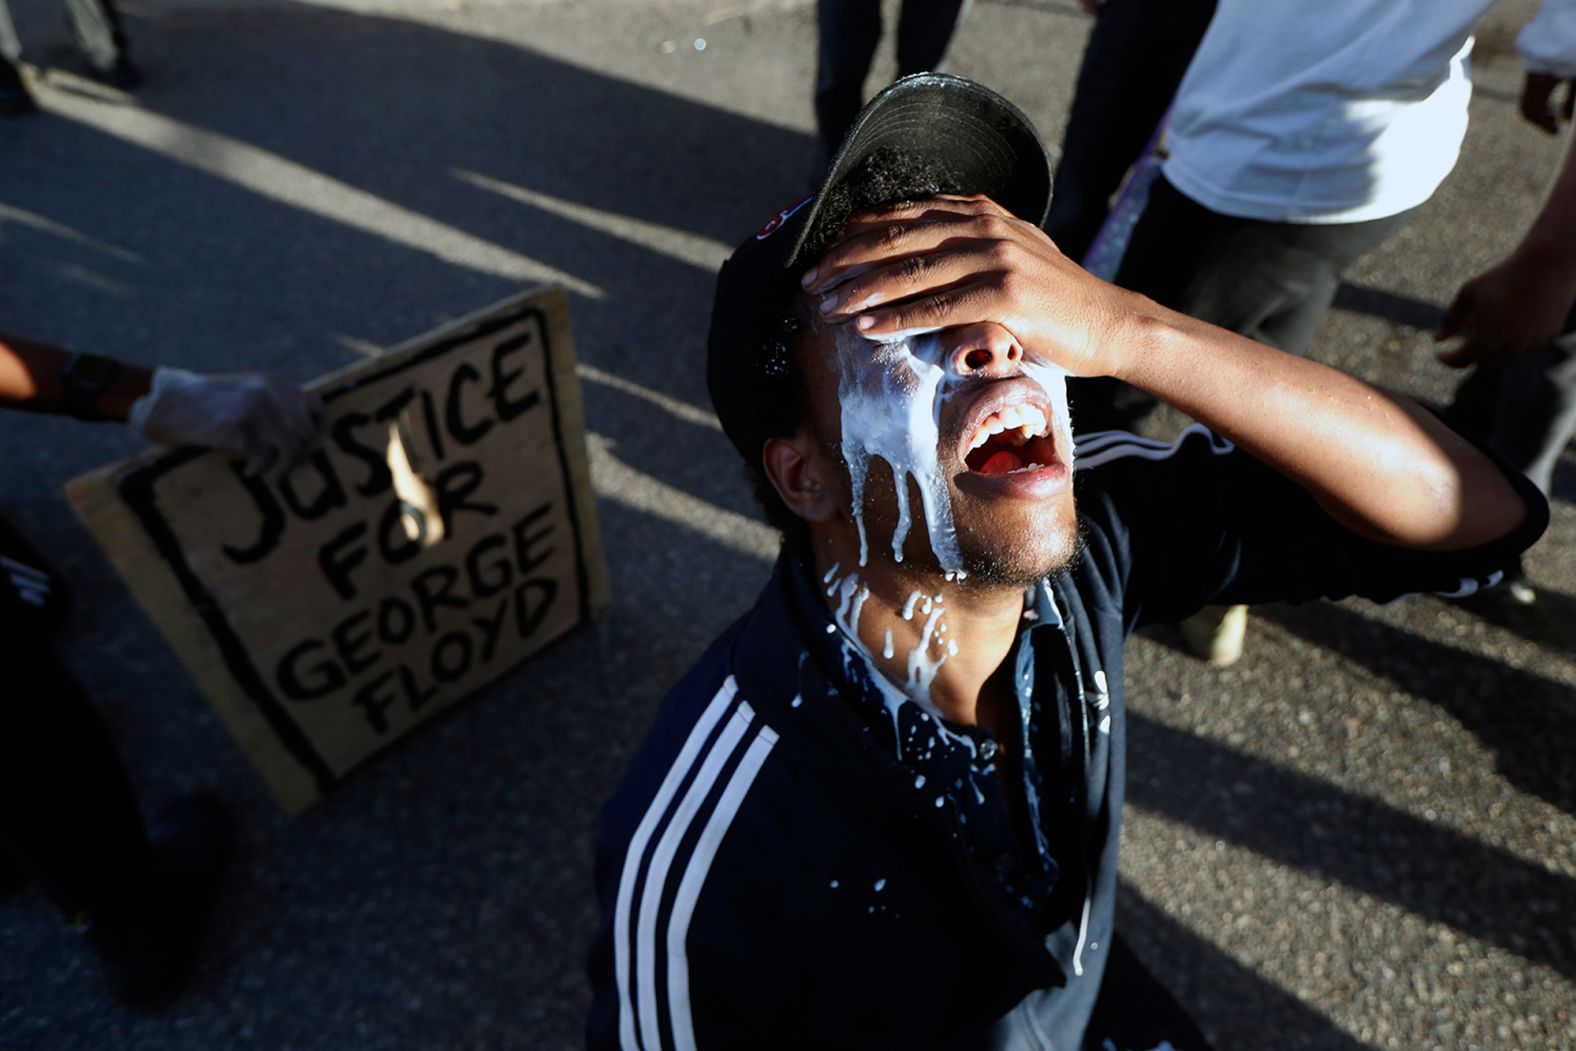 A protester in Minneapolis douses himself with milk on May 29.